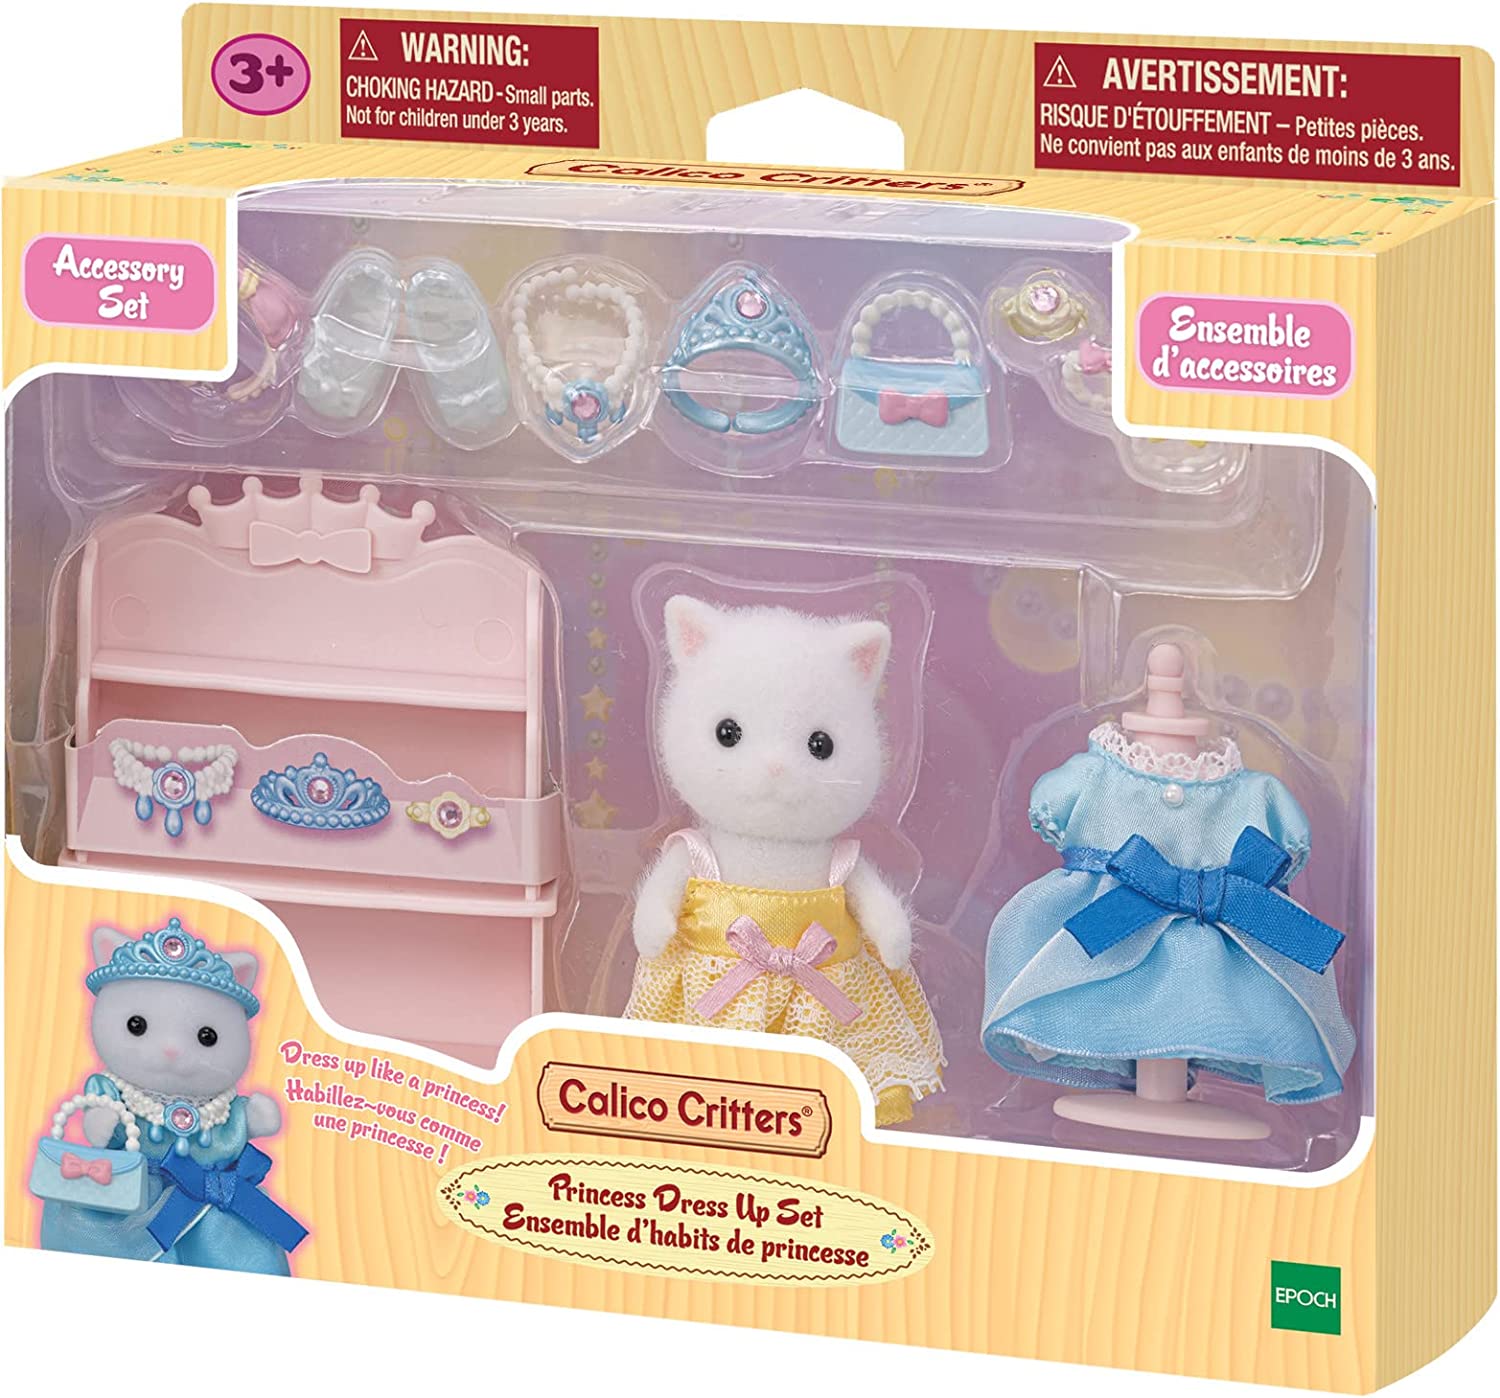 Sylvanian Families and Calico Critters Fun Dresses and Accessories Japanese  Craft Book -  Israel